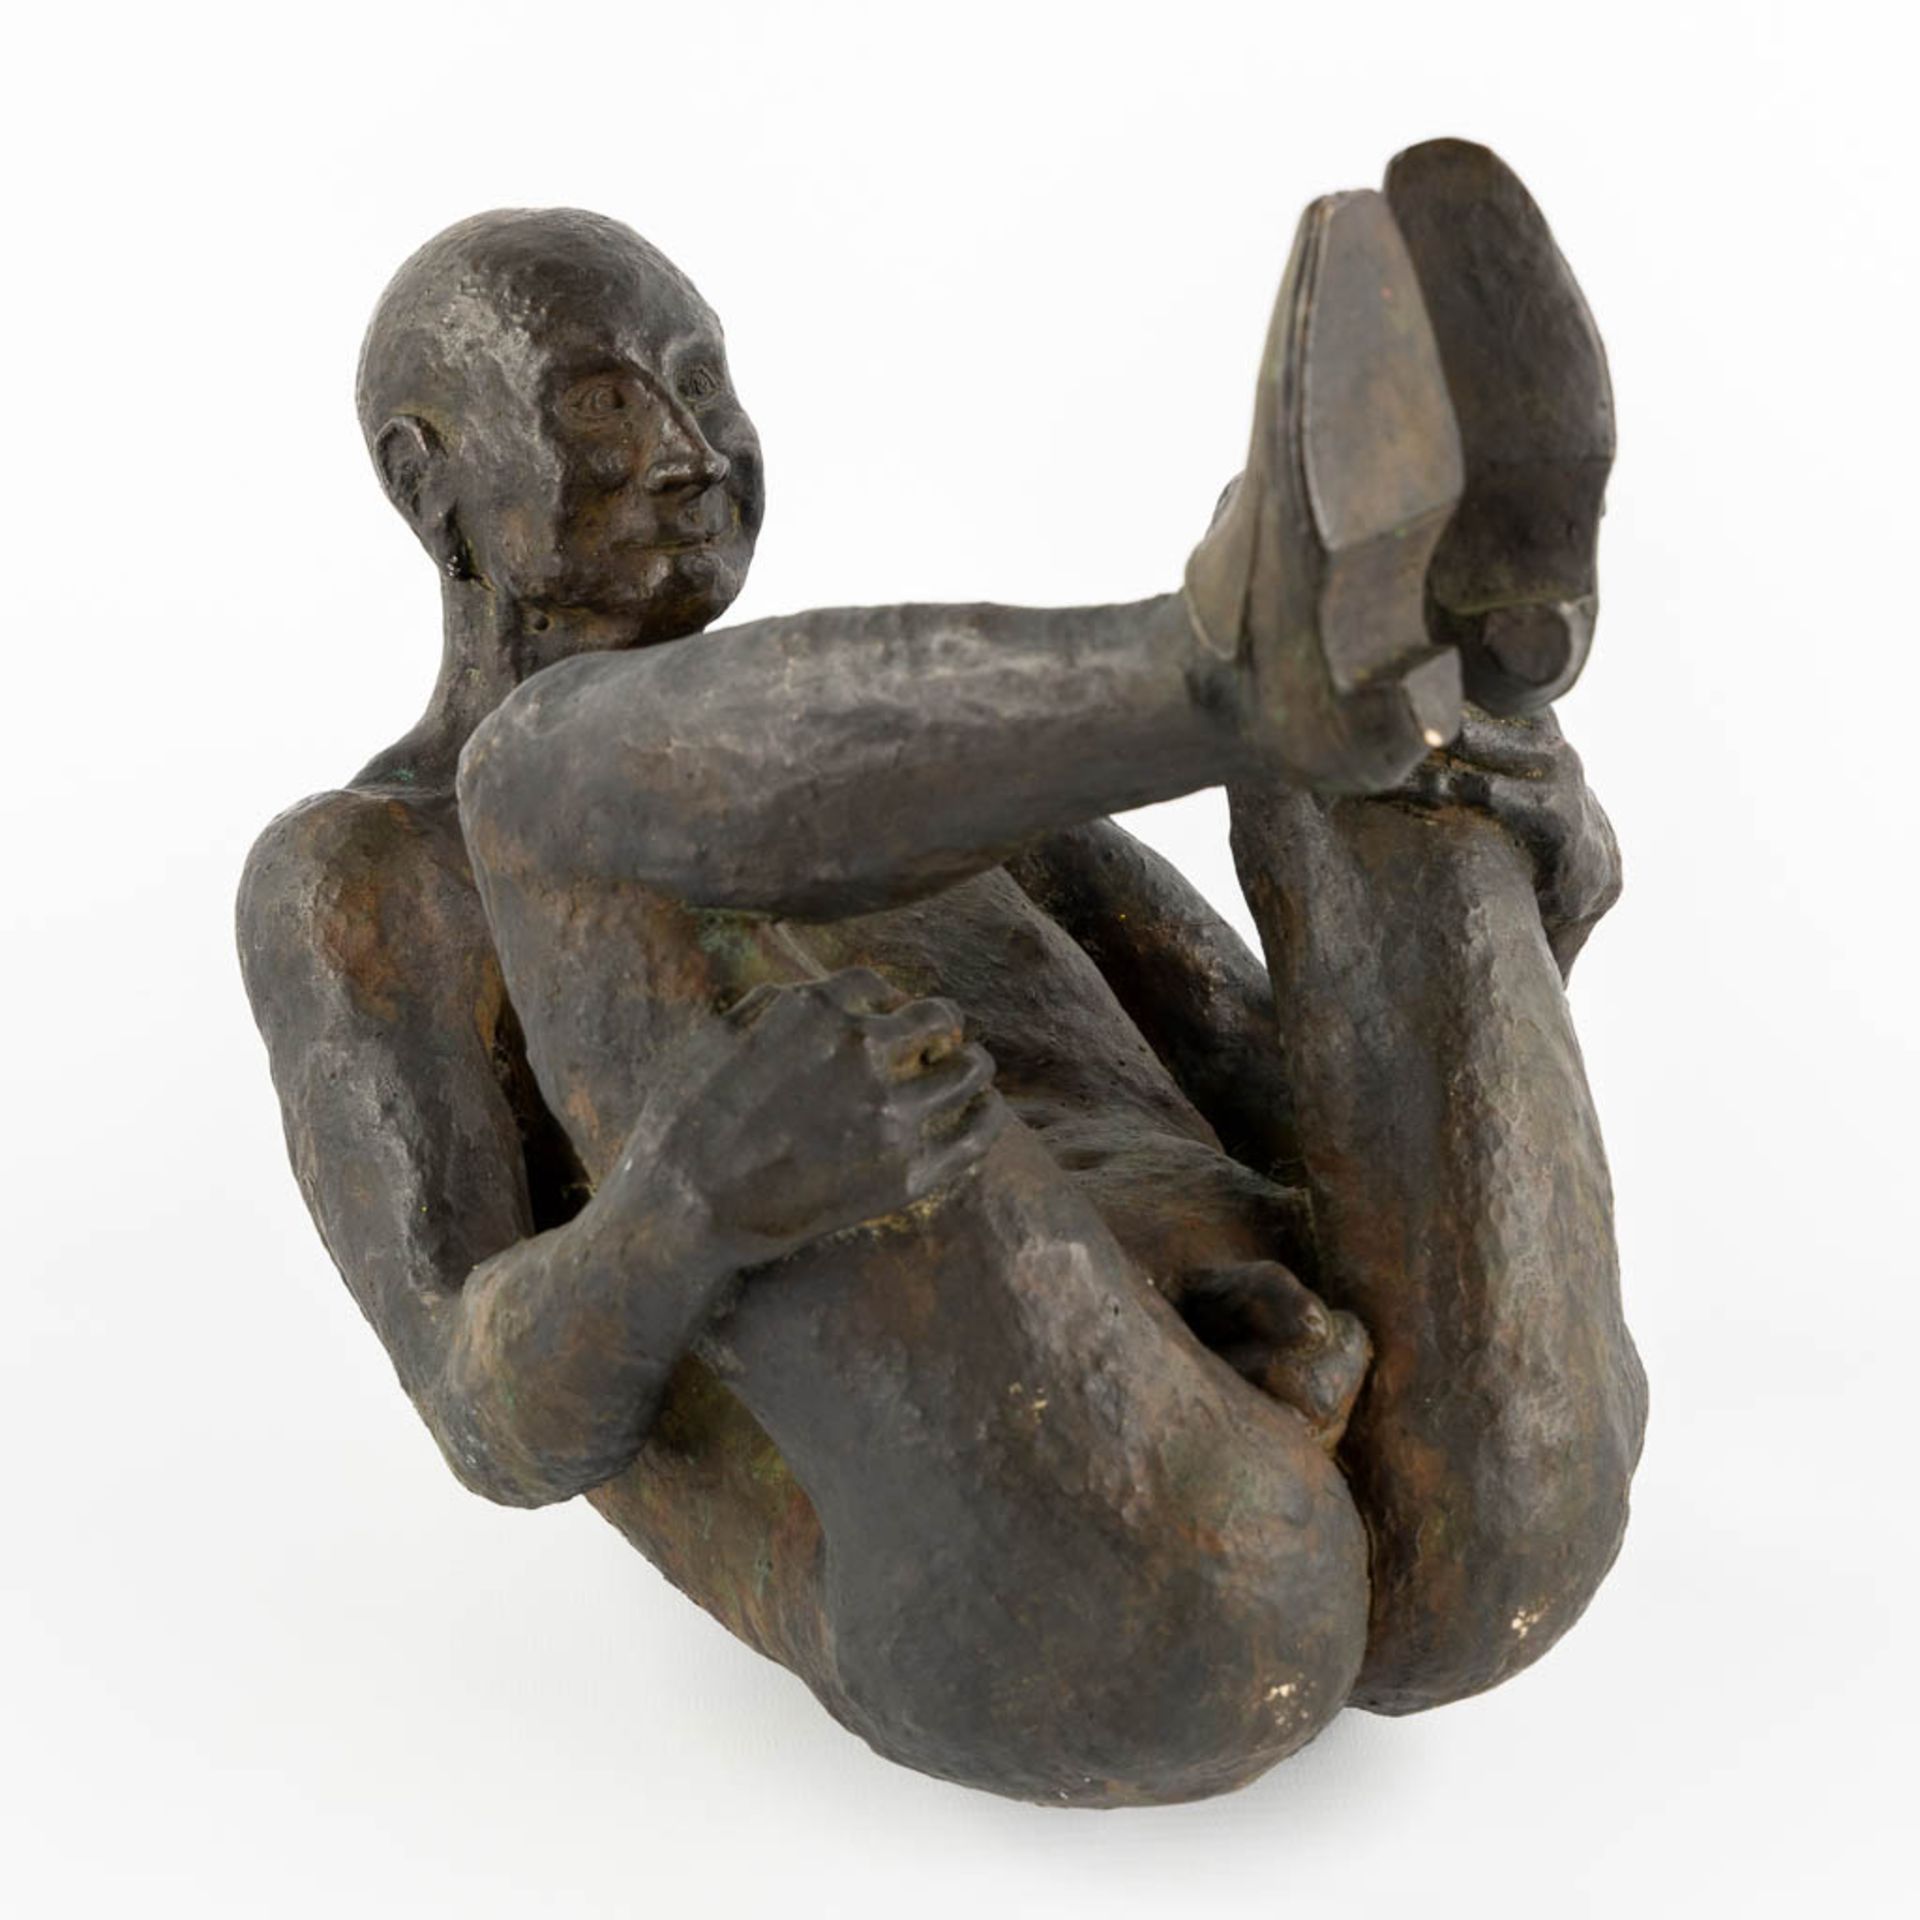 An Exposed Male figure' patinated bronze. (L:22 x W:30 x H:29 cm)